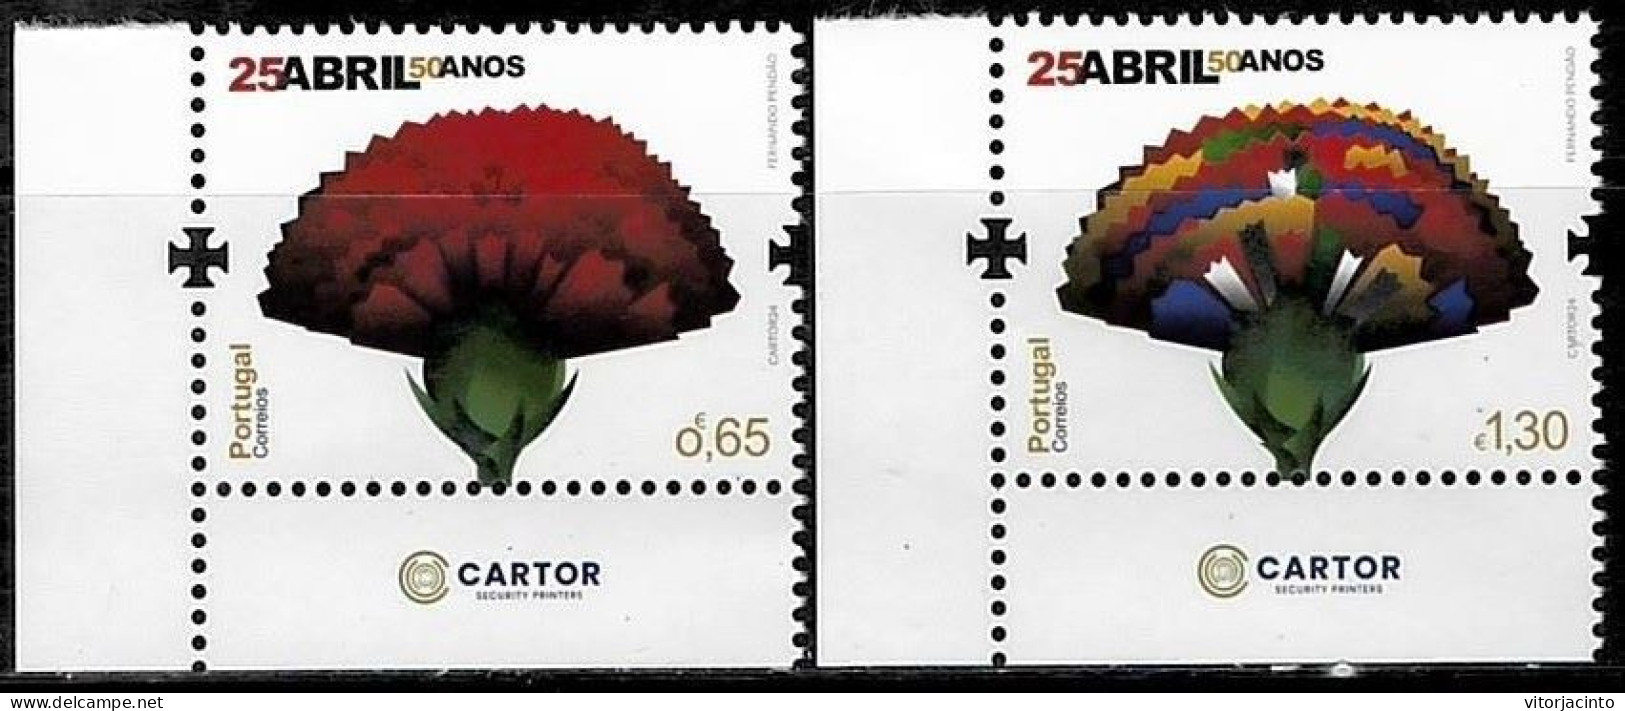 PORTUGAL - 25 April - 50 Years - Joint Issue Angola/Cape Verde/Portugal (Mint Stamps) - Date Of Issue: 2024-03-28 - Neufs